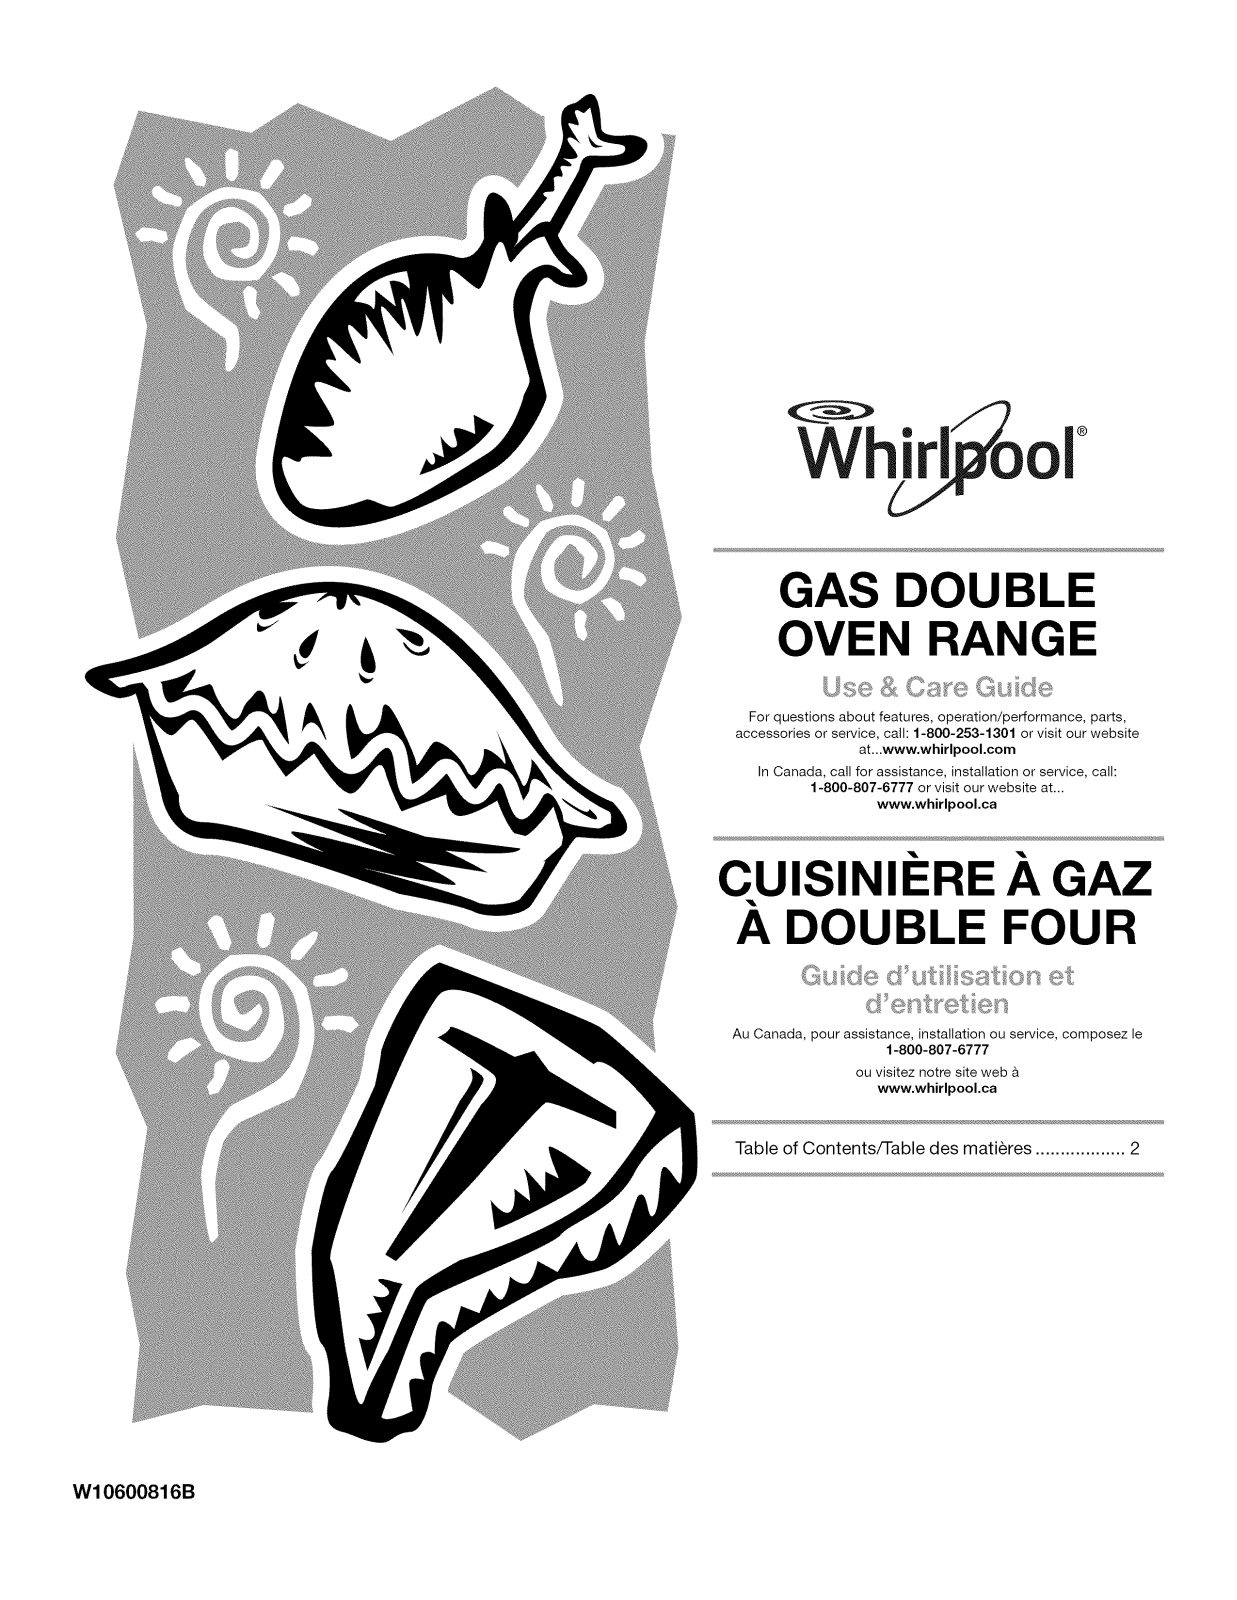 Whirlpool WGG755S0BS01, WGG755S0BH01, WGG755S0BE01, WGG555S0BW01, WGG555S0BW00 Owner’s Manual